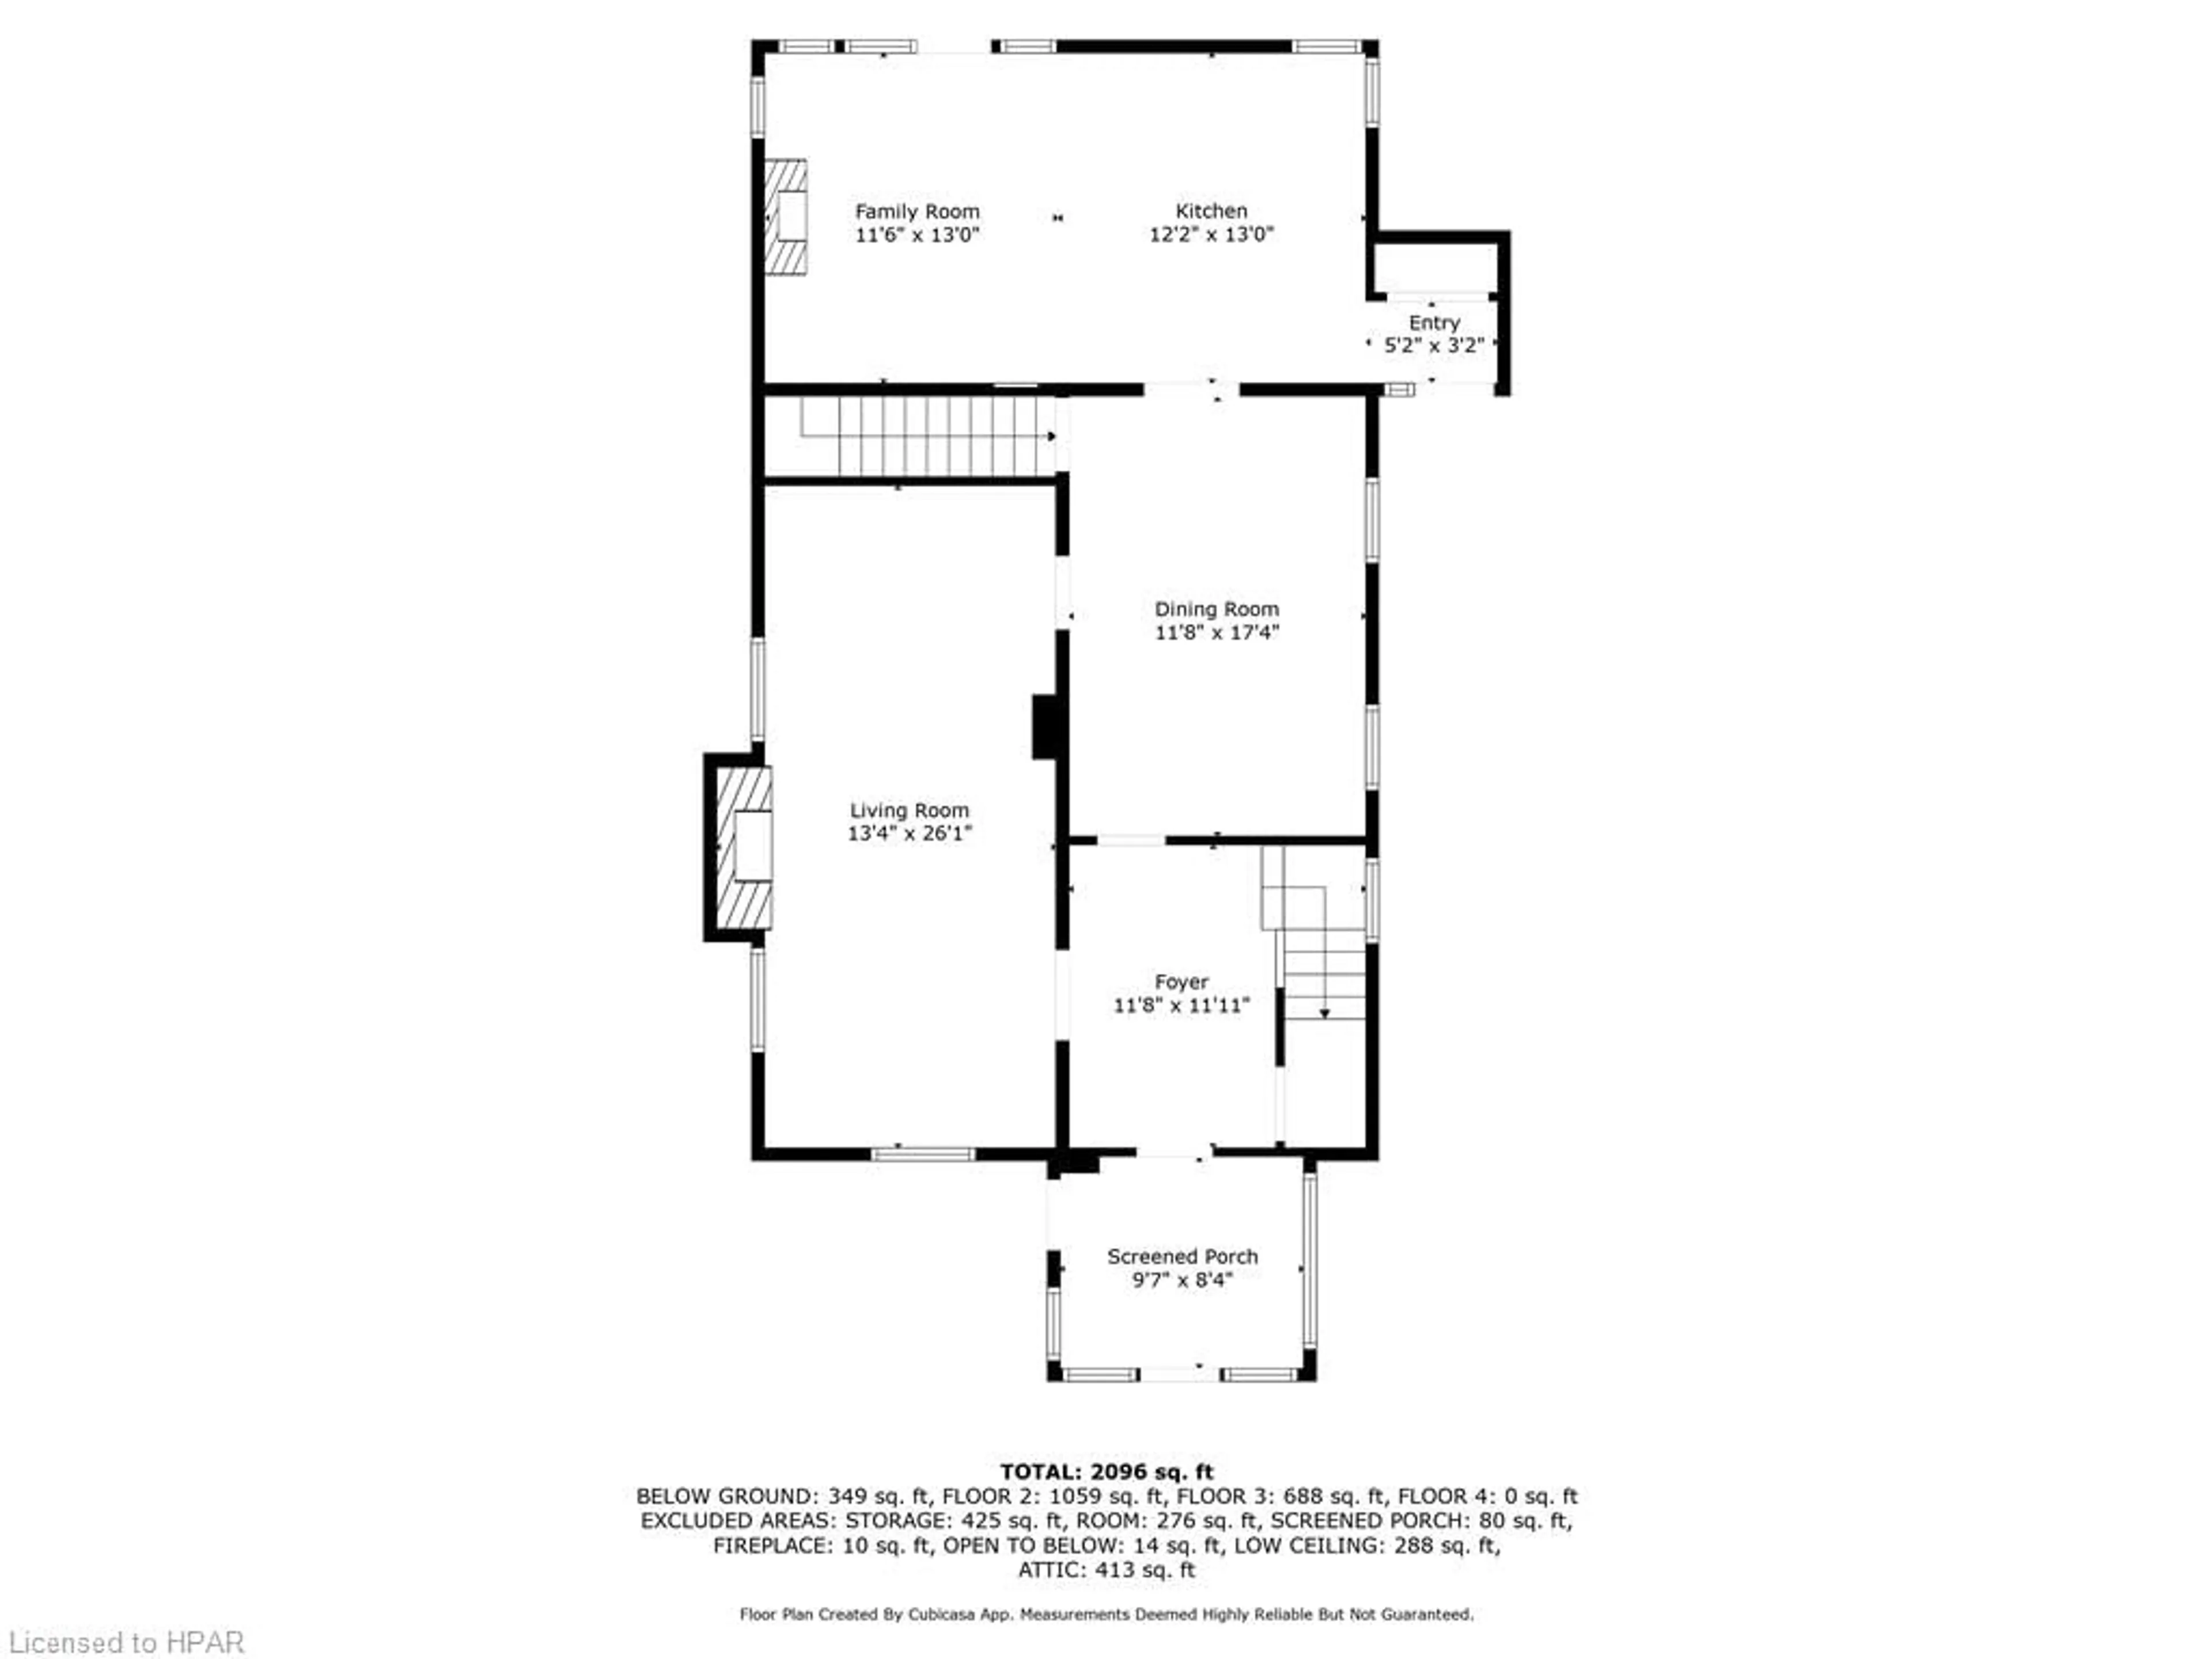 Floor plan for 126 Nelson St, Goderich Ontario N7A 1R9